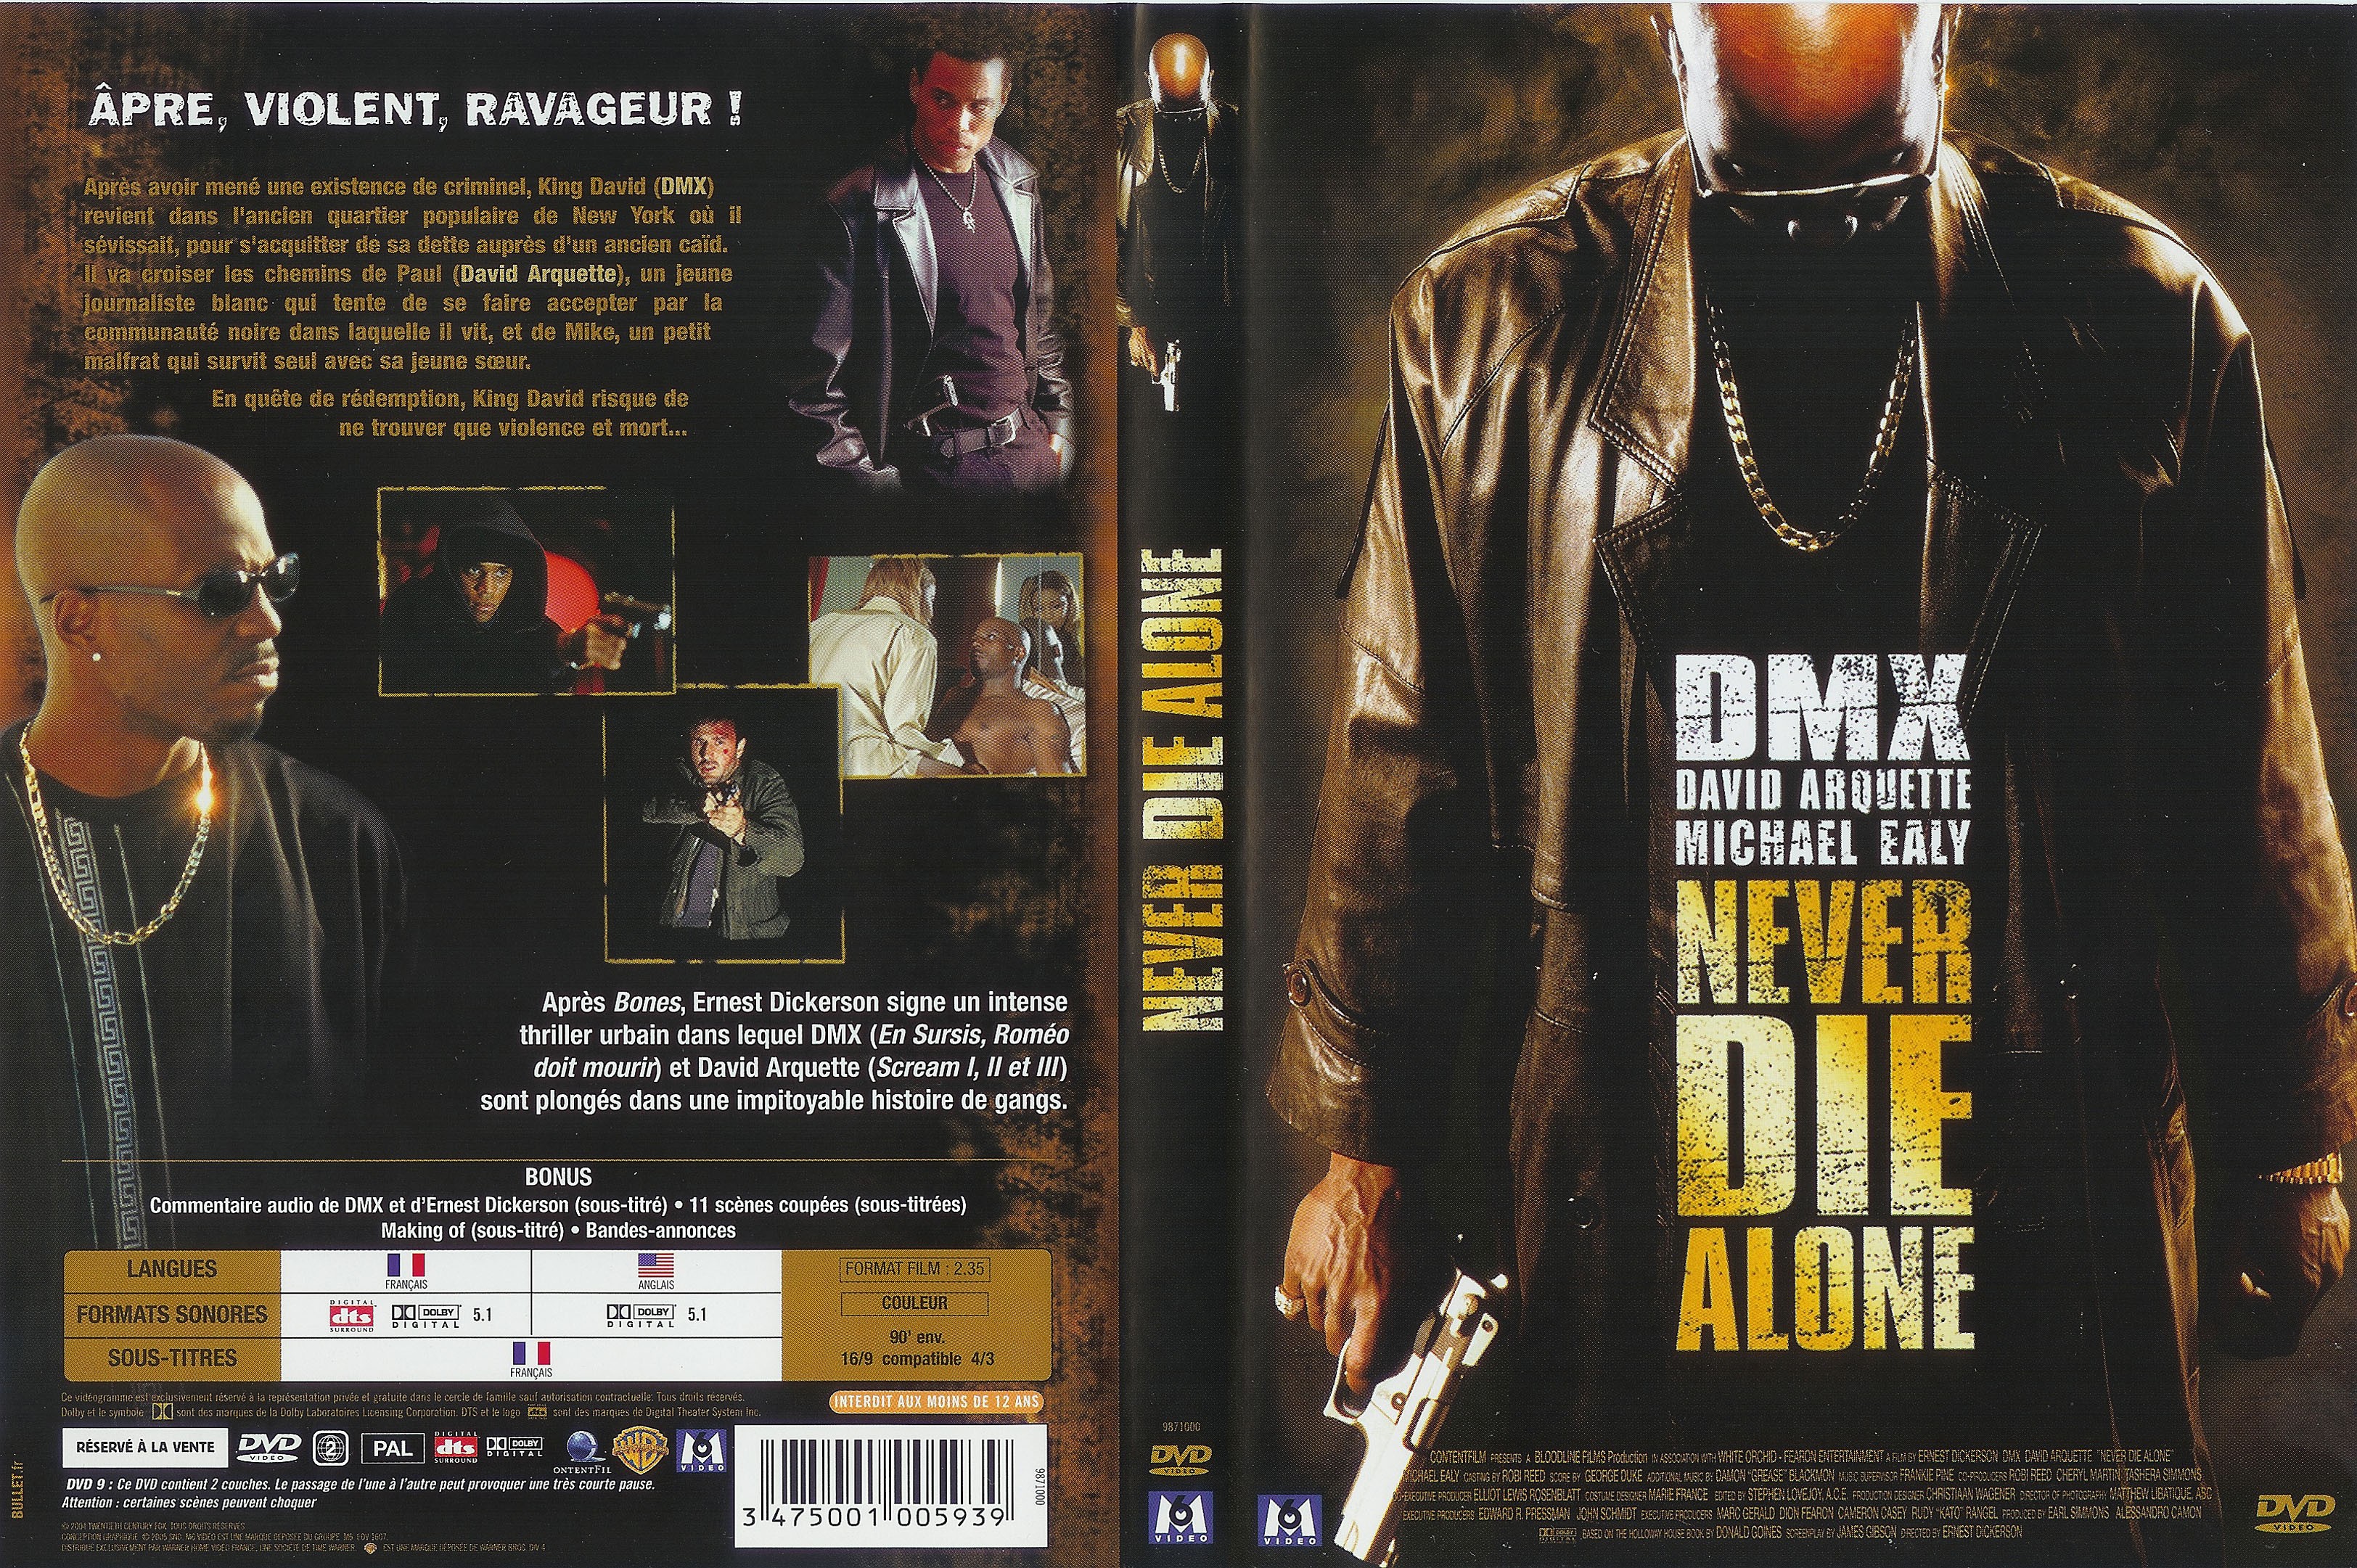 Jaquette DVD Never die alone